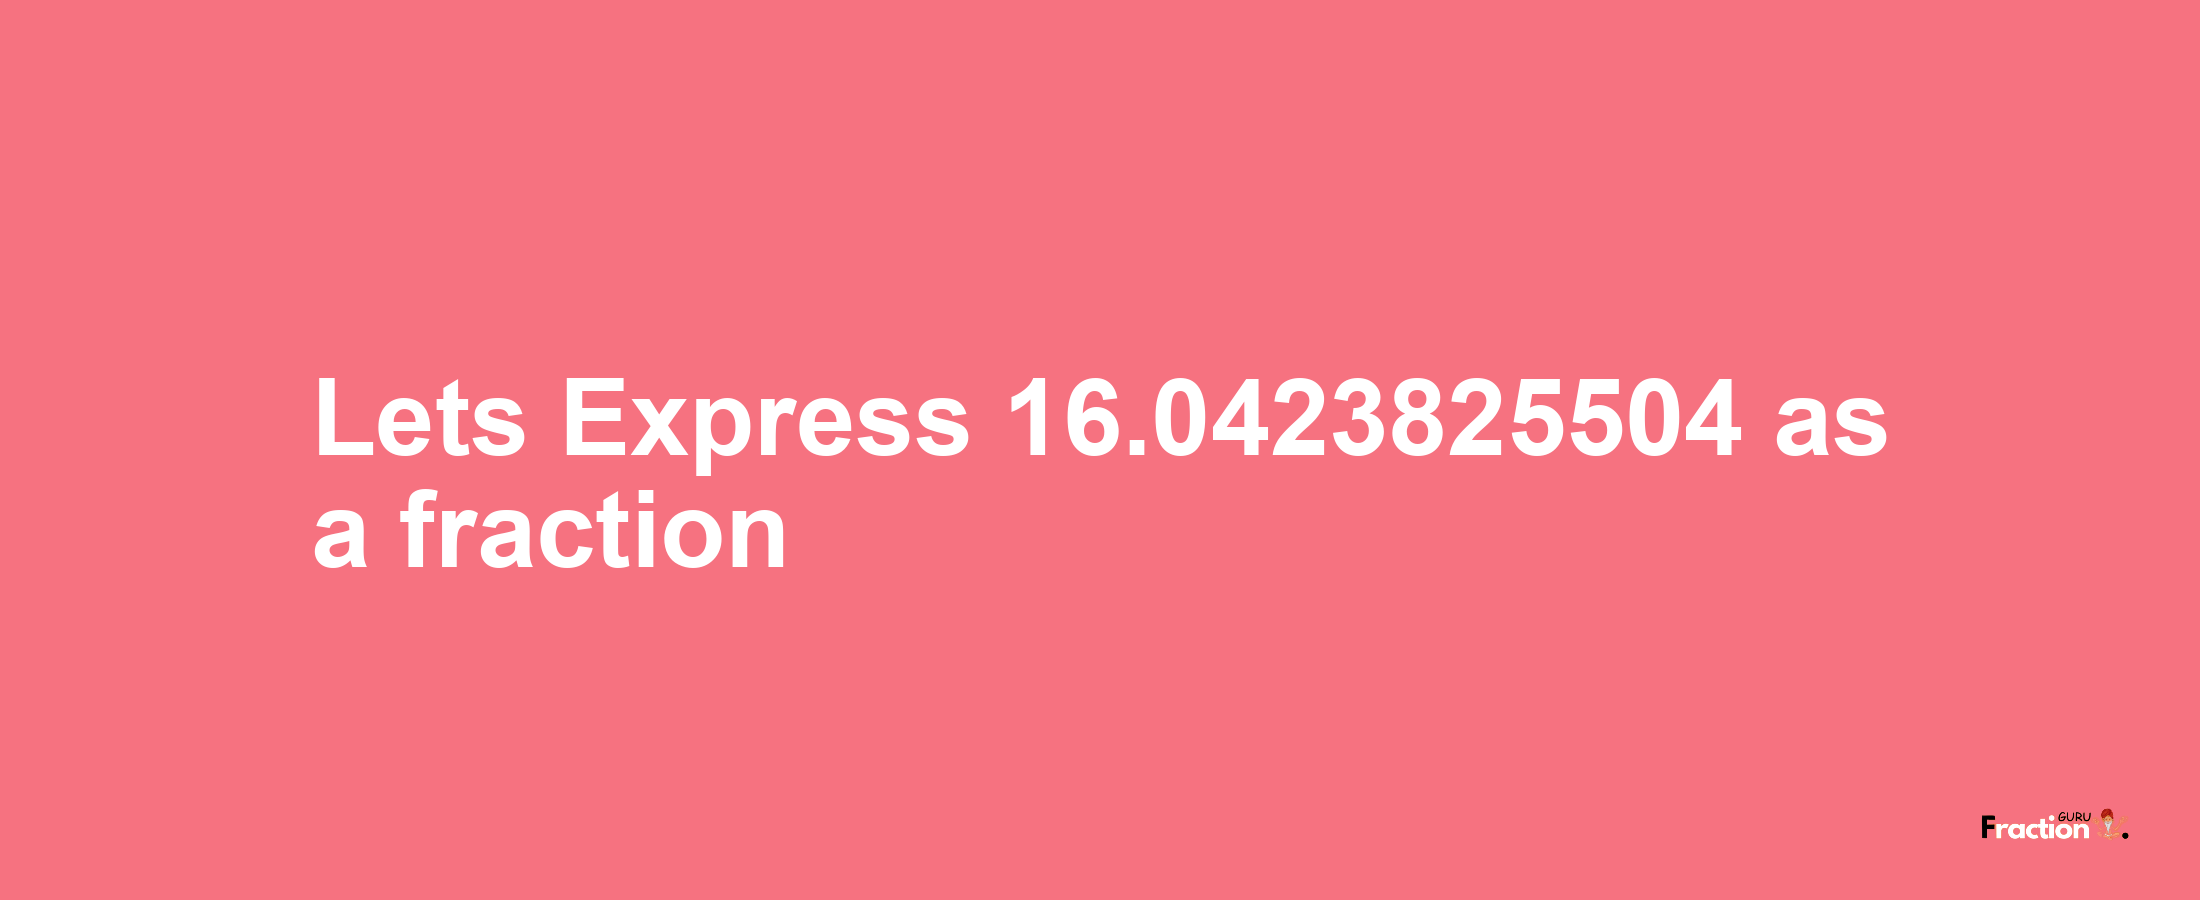 Lets Express 16.0423825504 as afraction